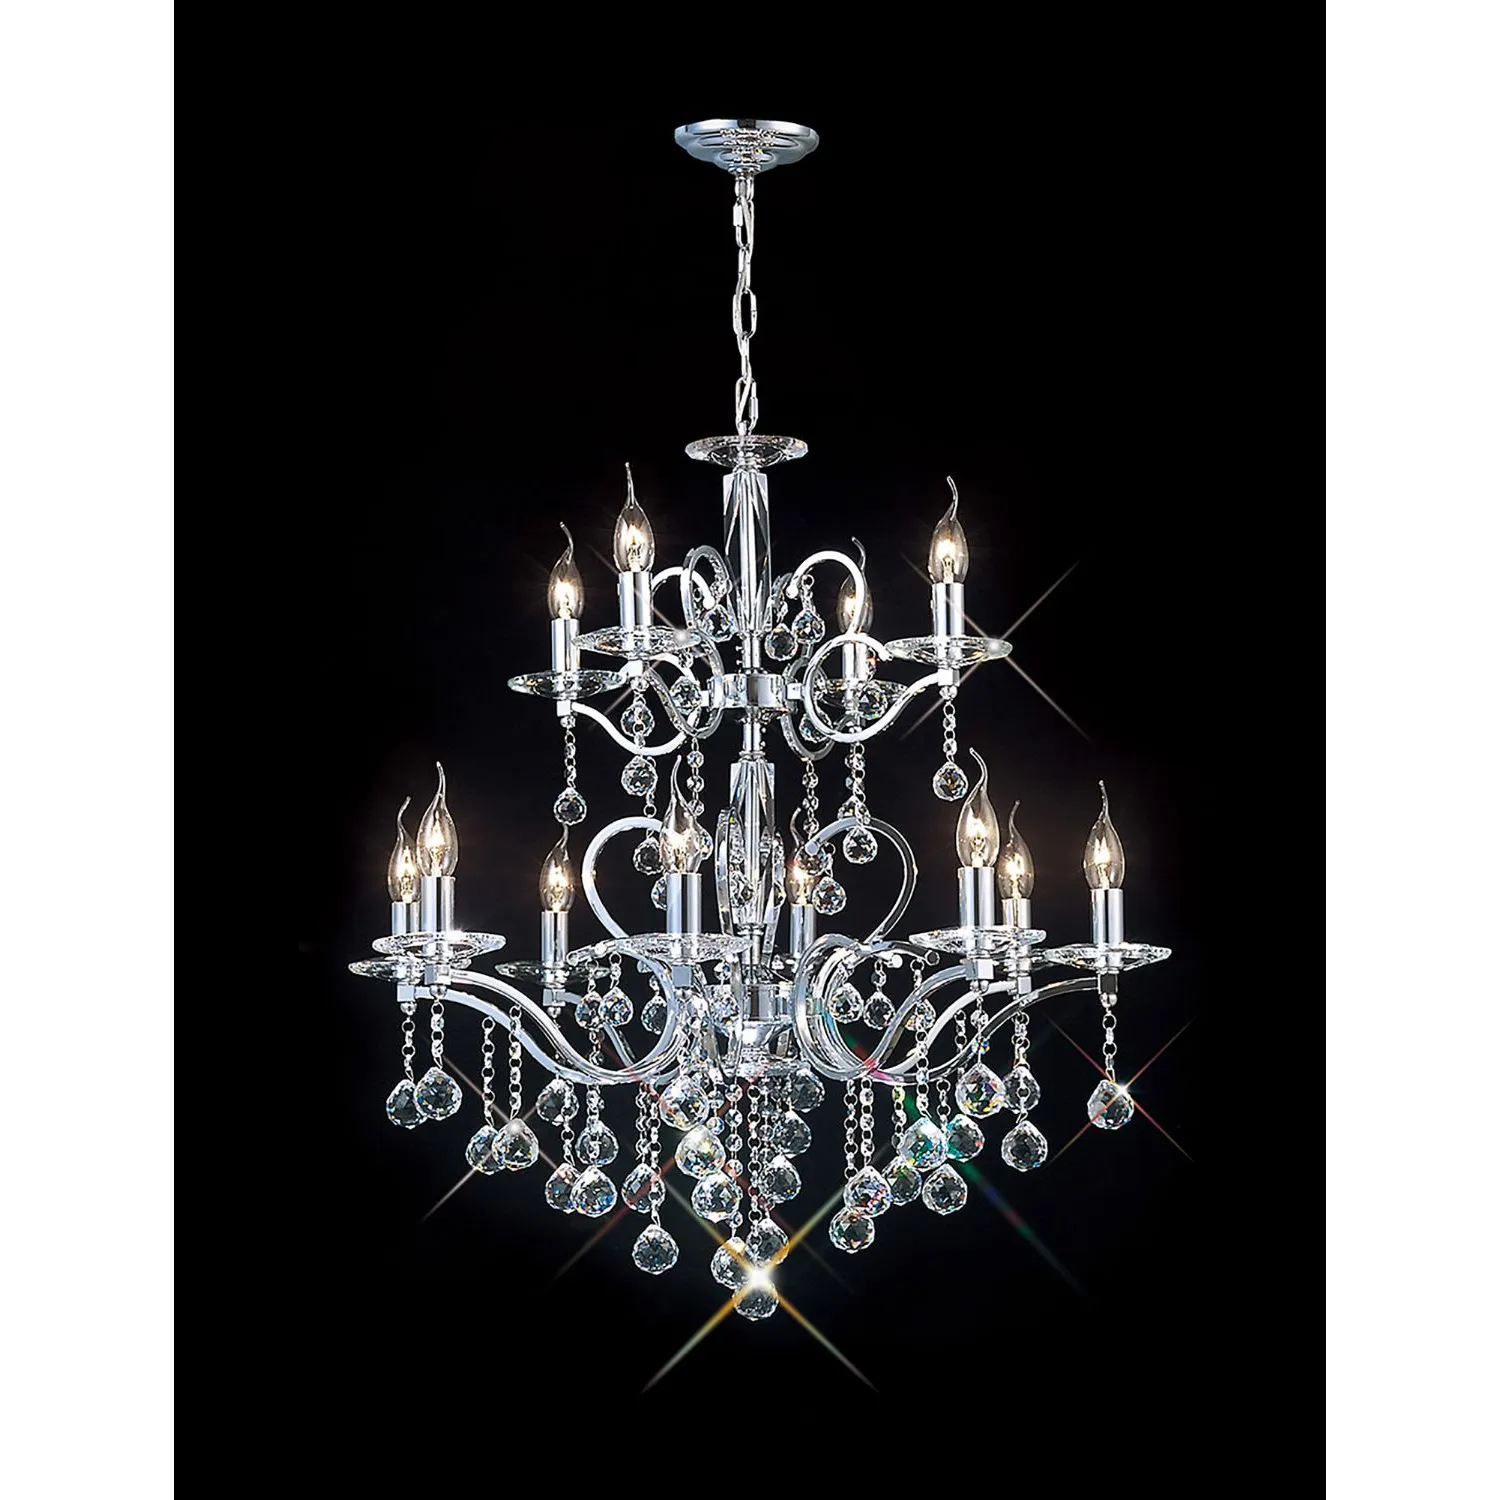 Zinta Pendant 2 Tier 12 Light E14 Polished Chrome Crystal, (ITEM REQUIRES CONSTRUCTION CONNECTION) Item Weight: 15.0kg